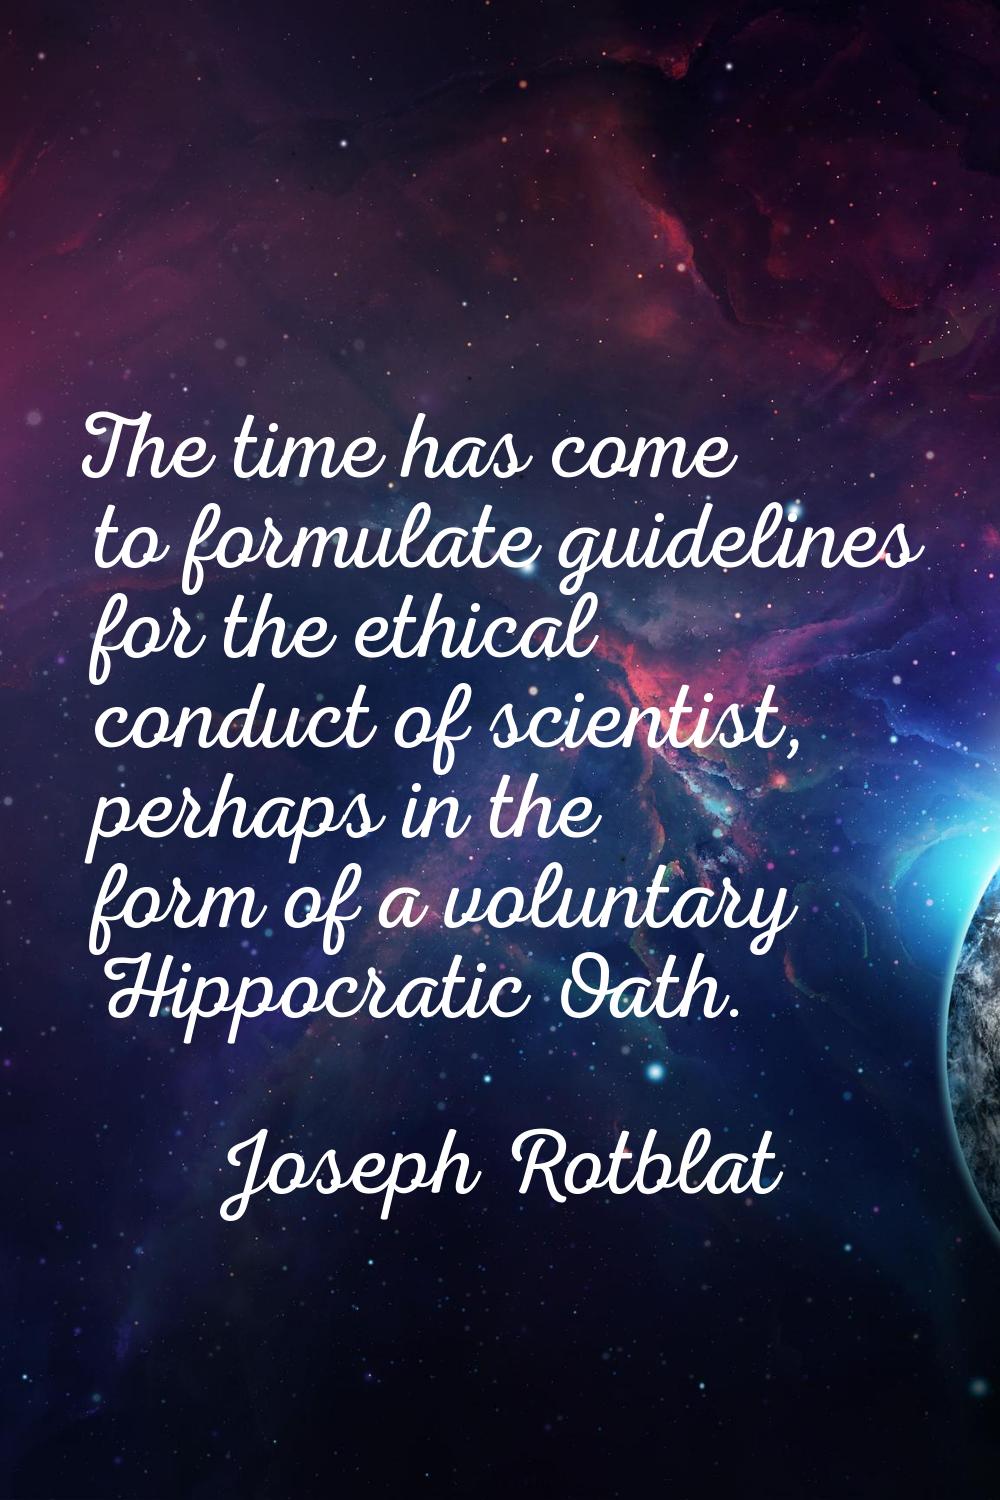 The time has come to formulate guidelines for the ethical conduct of scientist, perhaps in the form